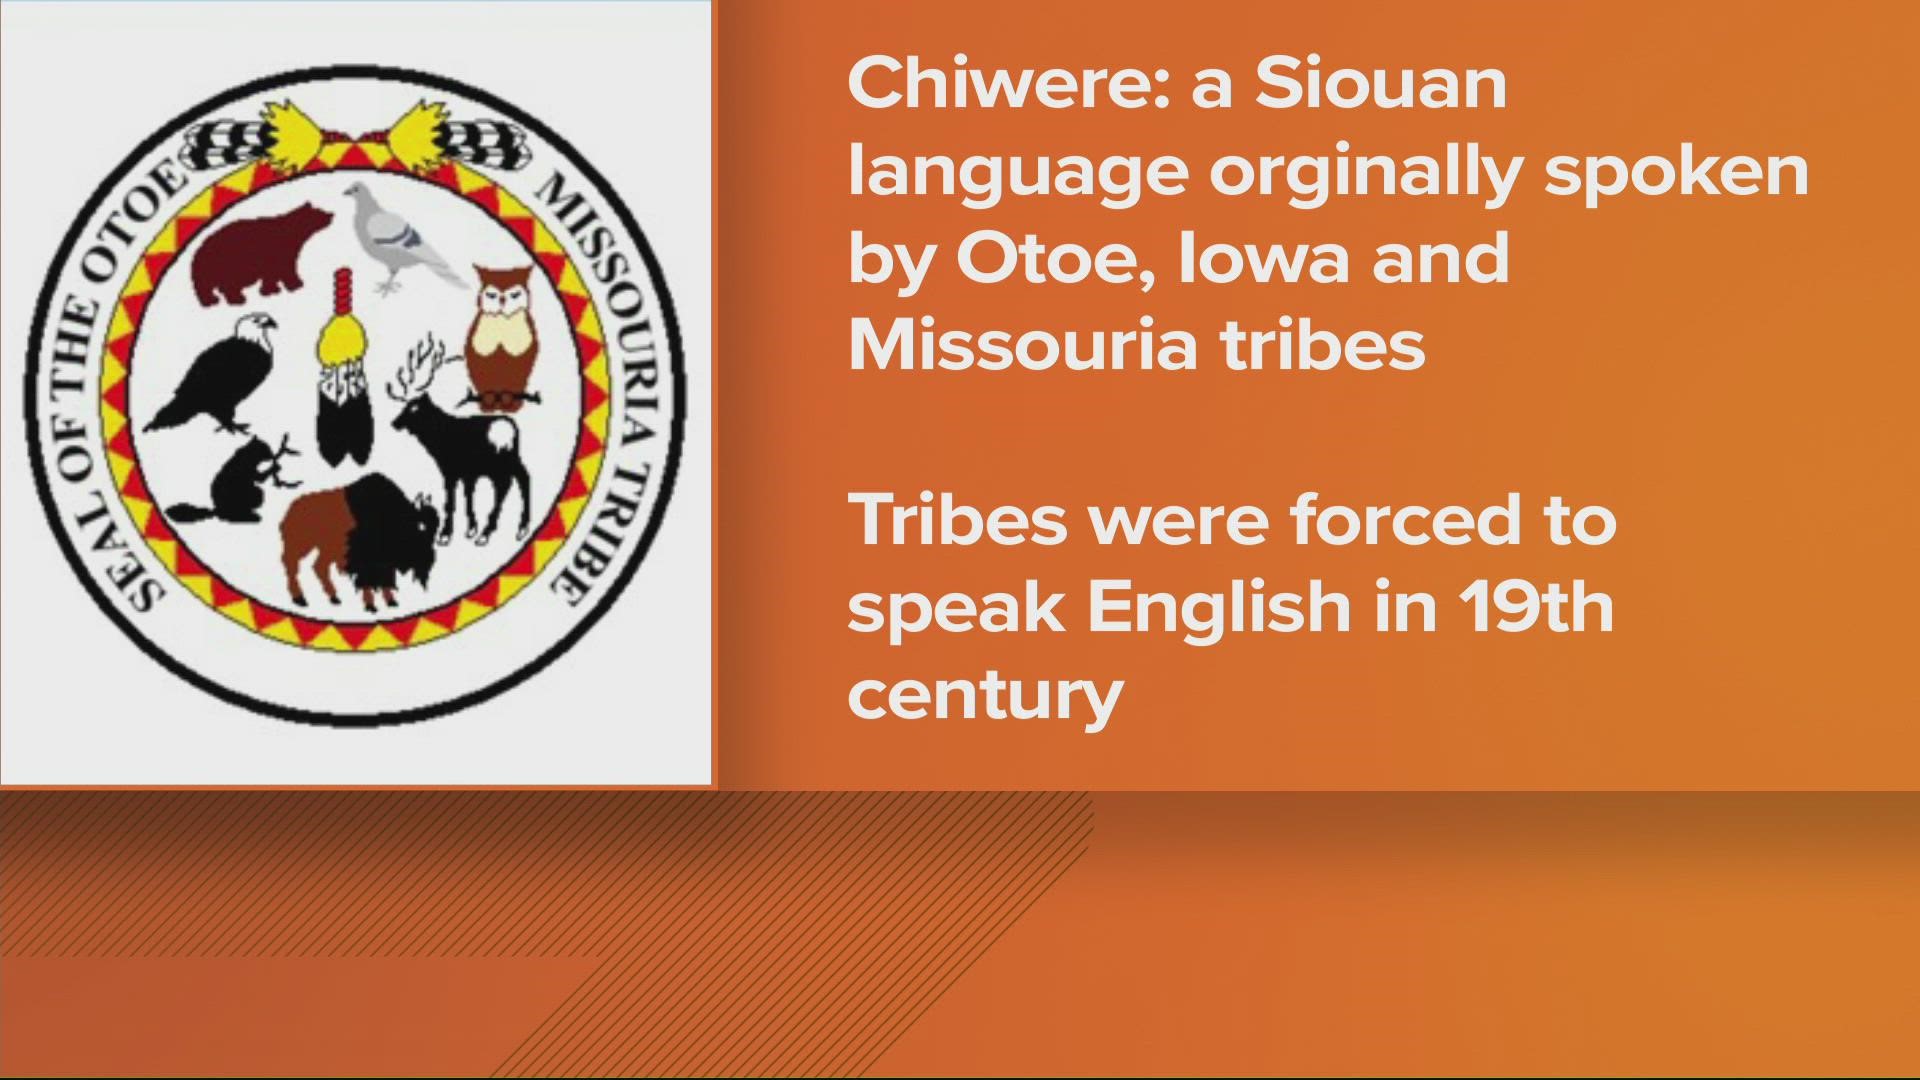 The state of Missouri was named for the Missouria tribe. They are working to save the Otoe-Missouria language.